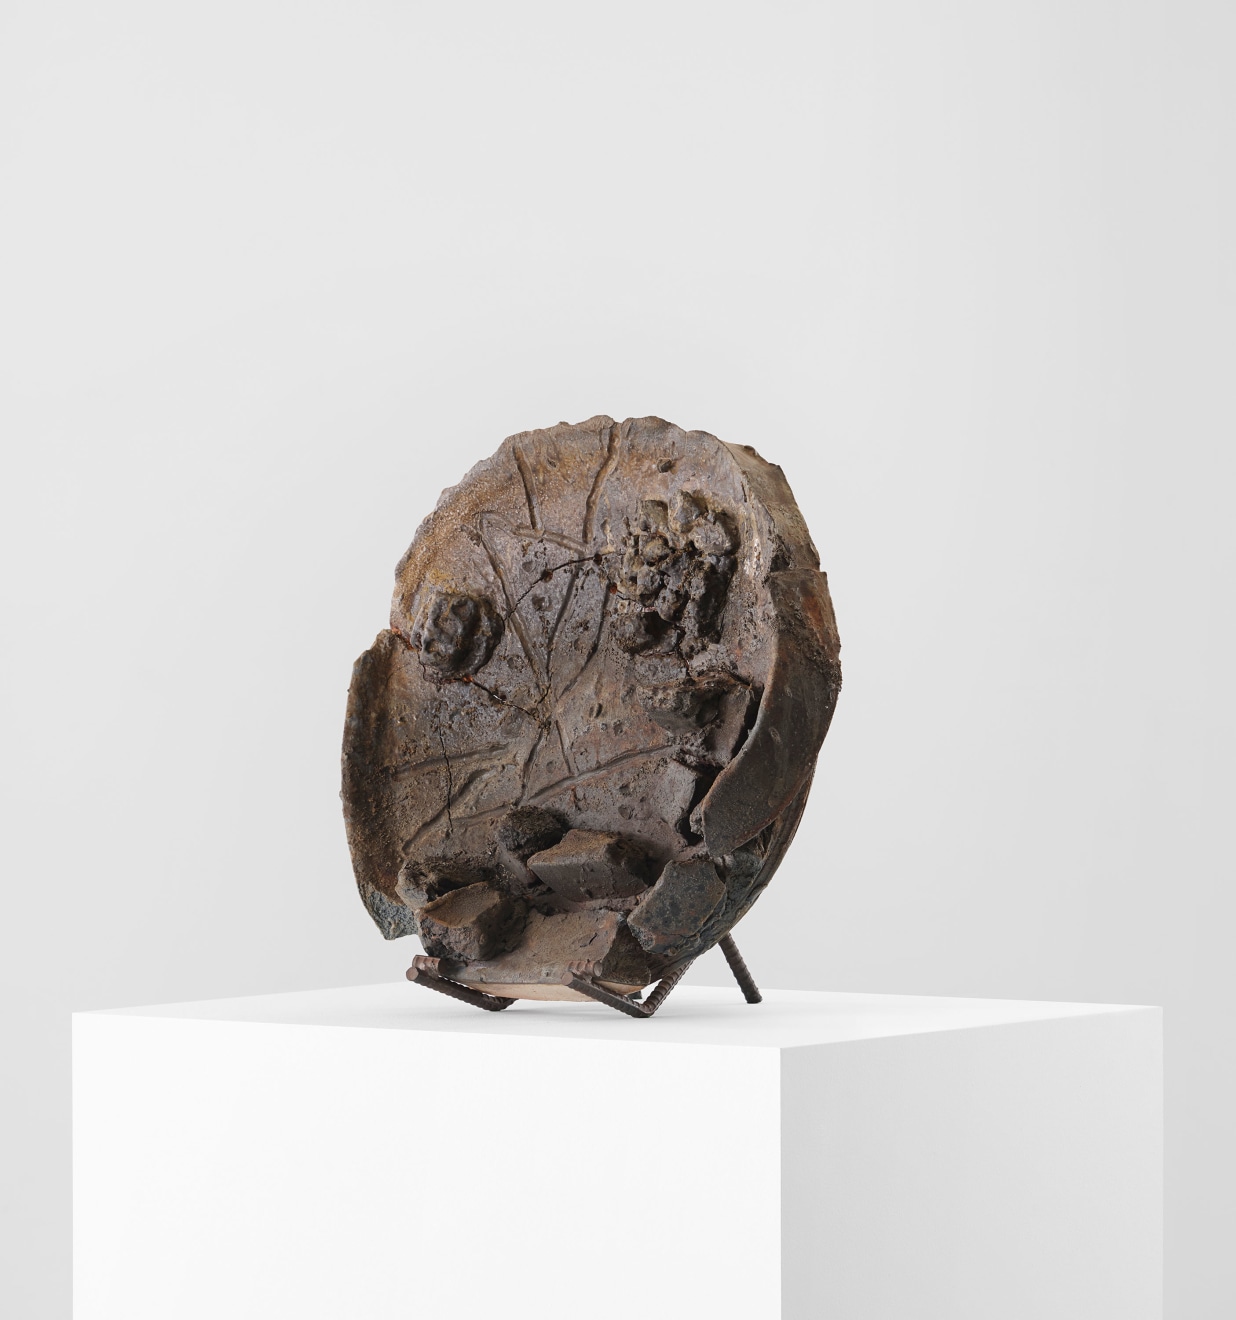 Peter Voulkos, Untitled Plate, 1997